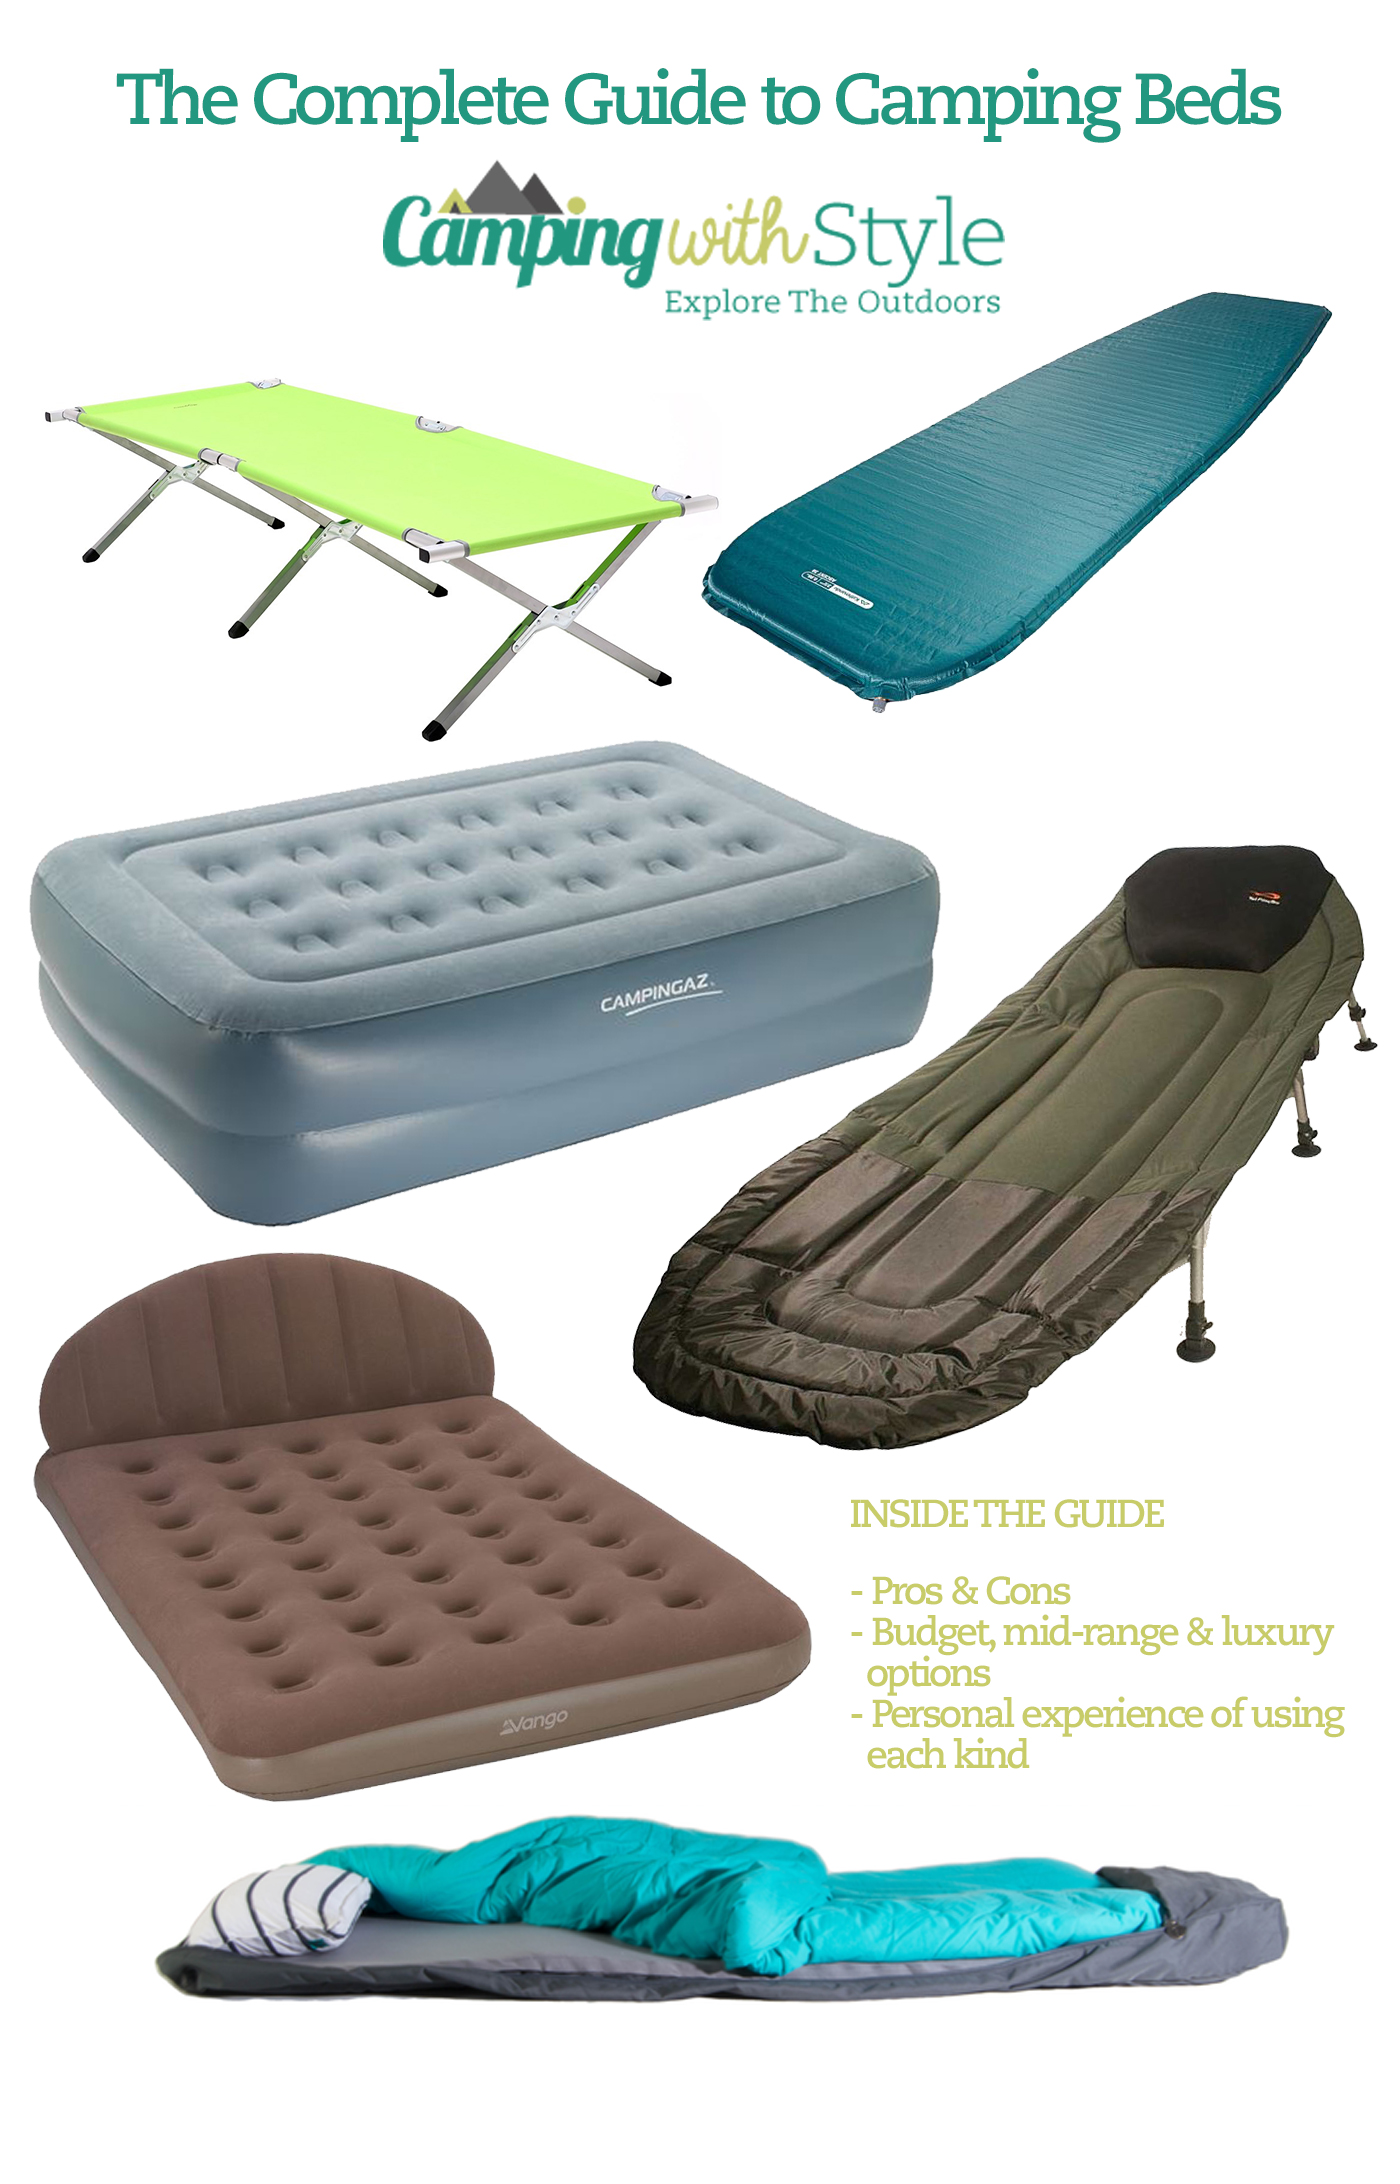 Air beds - Outwell Inflatable Mattress - Blow Up Mats for Camping uk